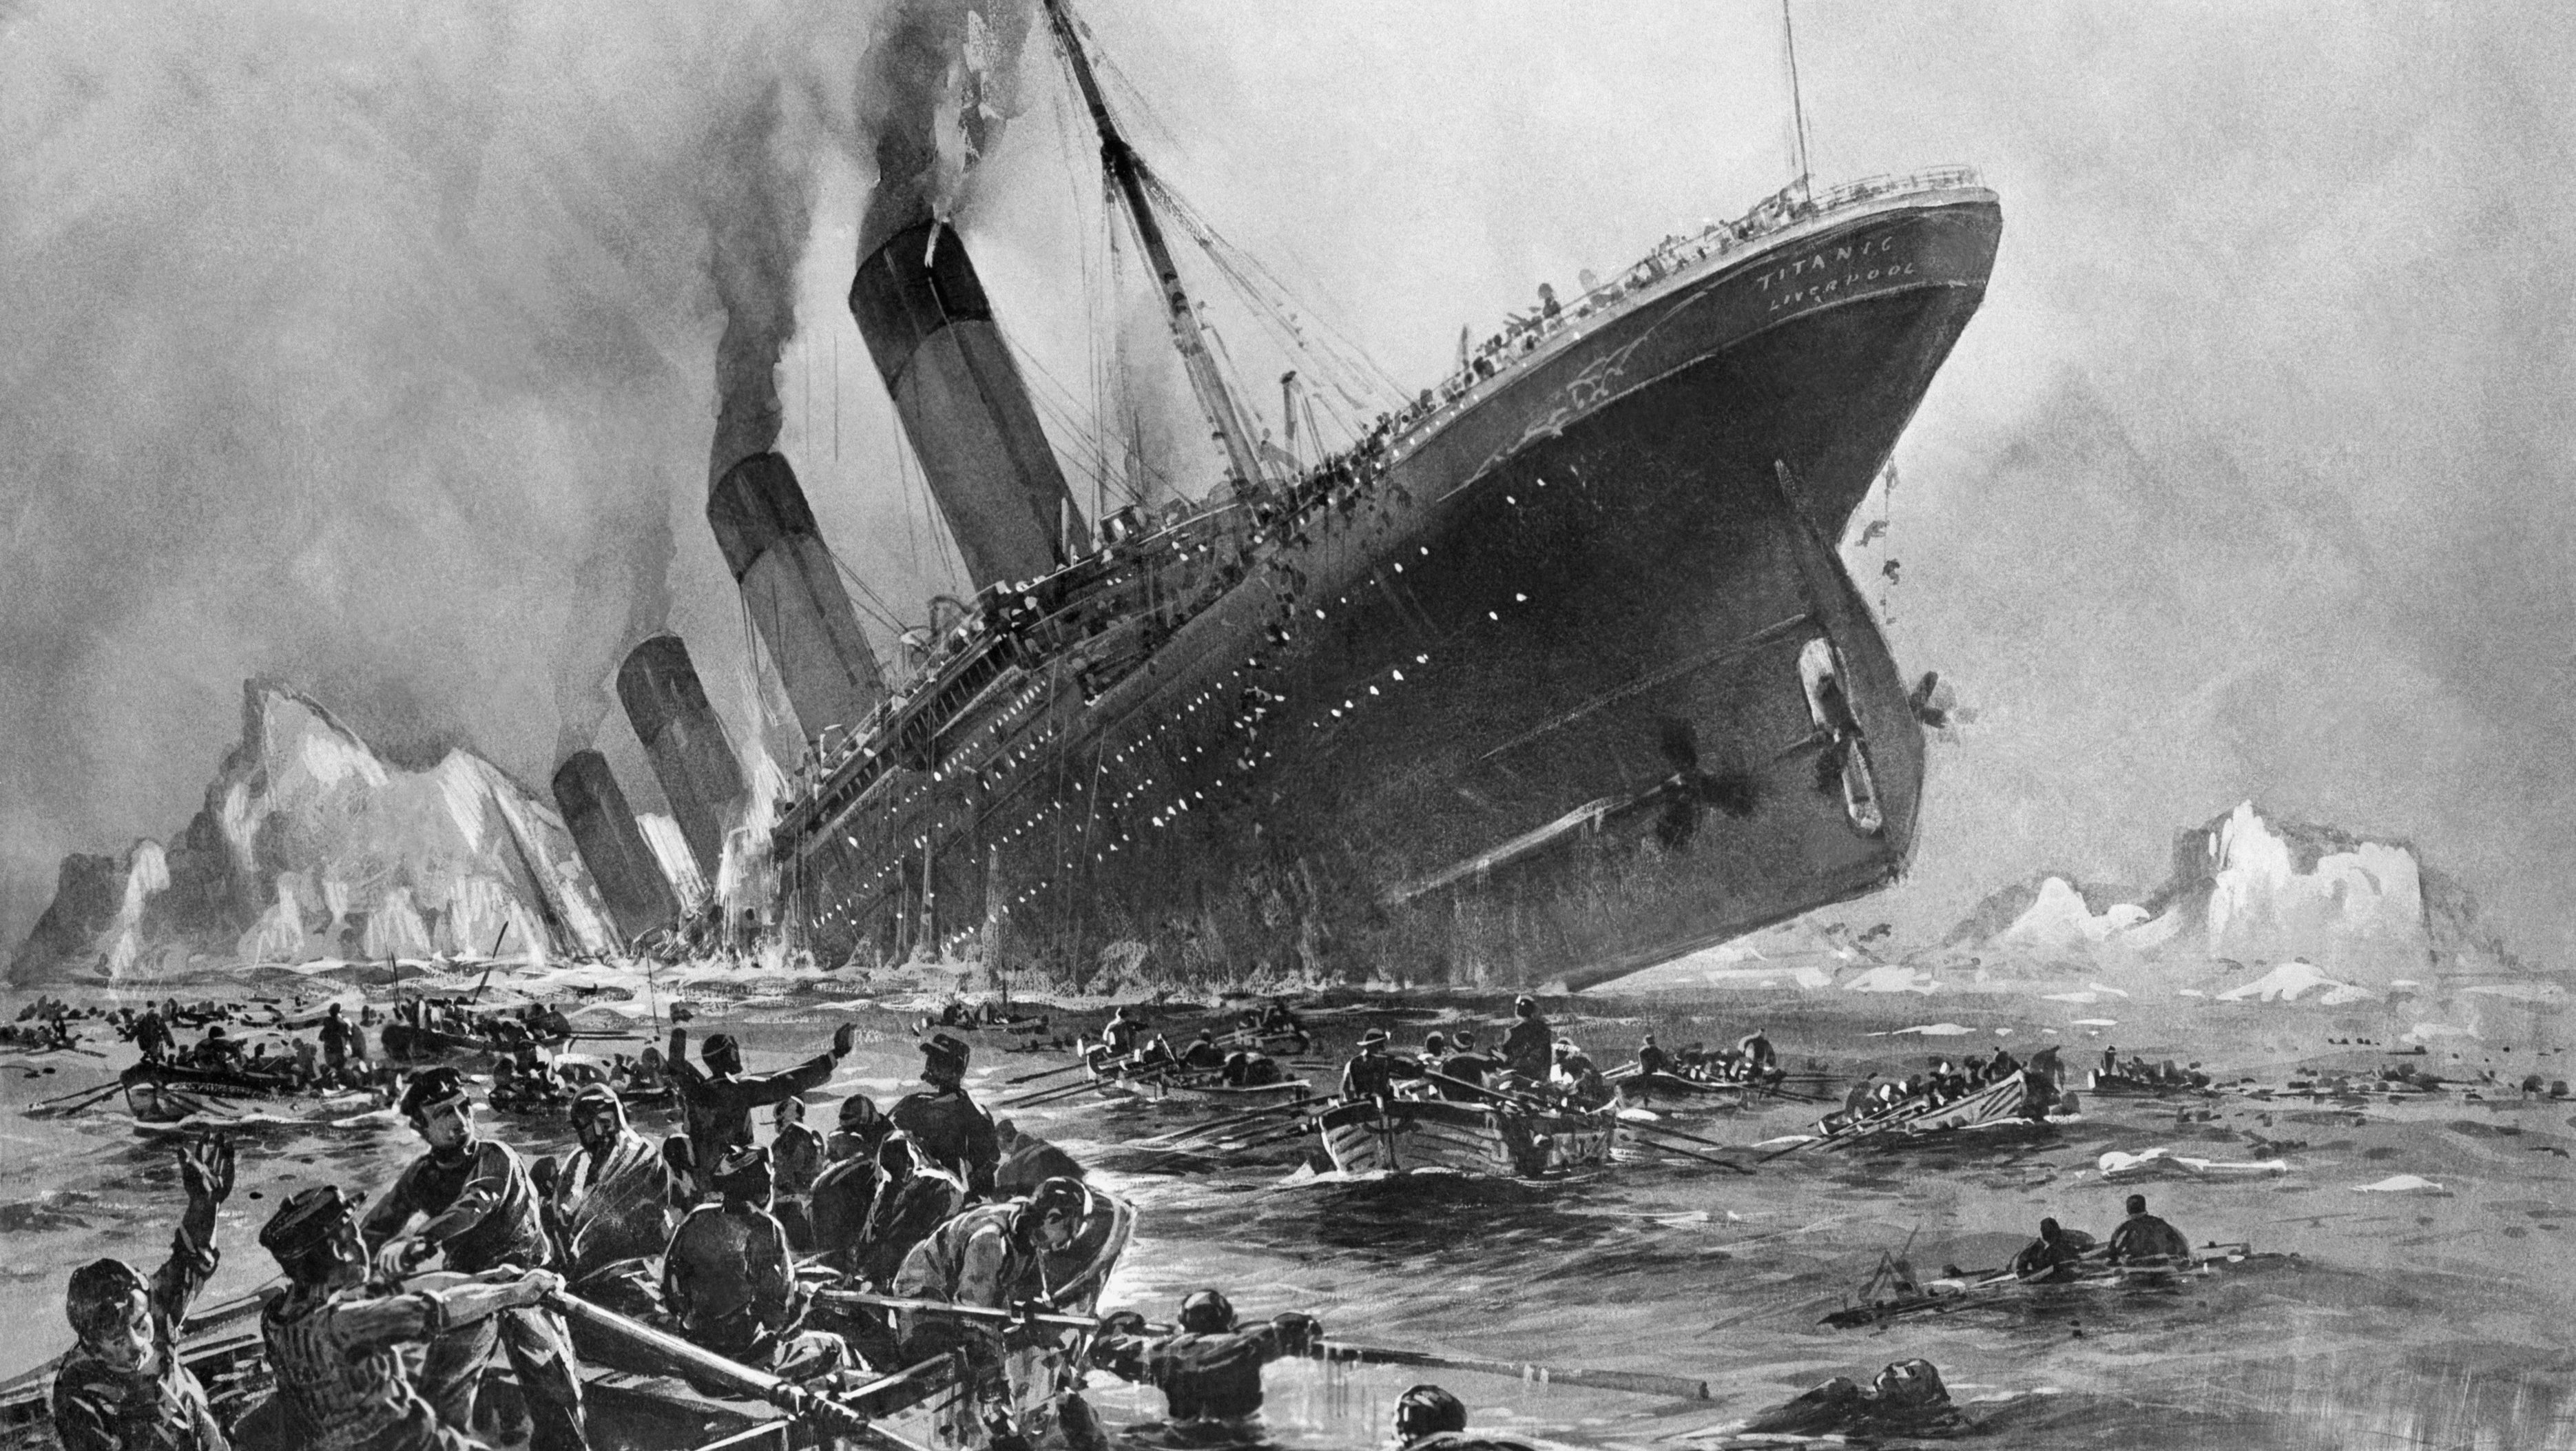 Sinking of the Titanic by Willy Stoewer